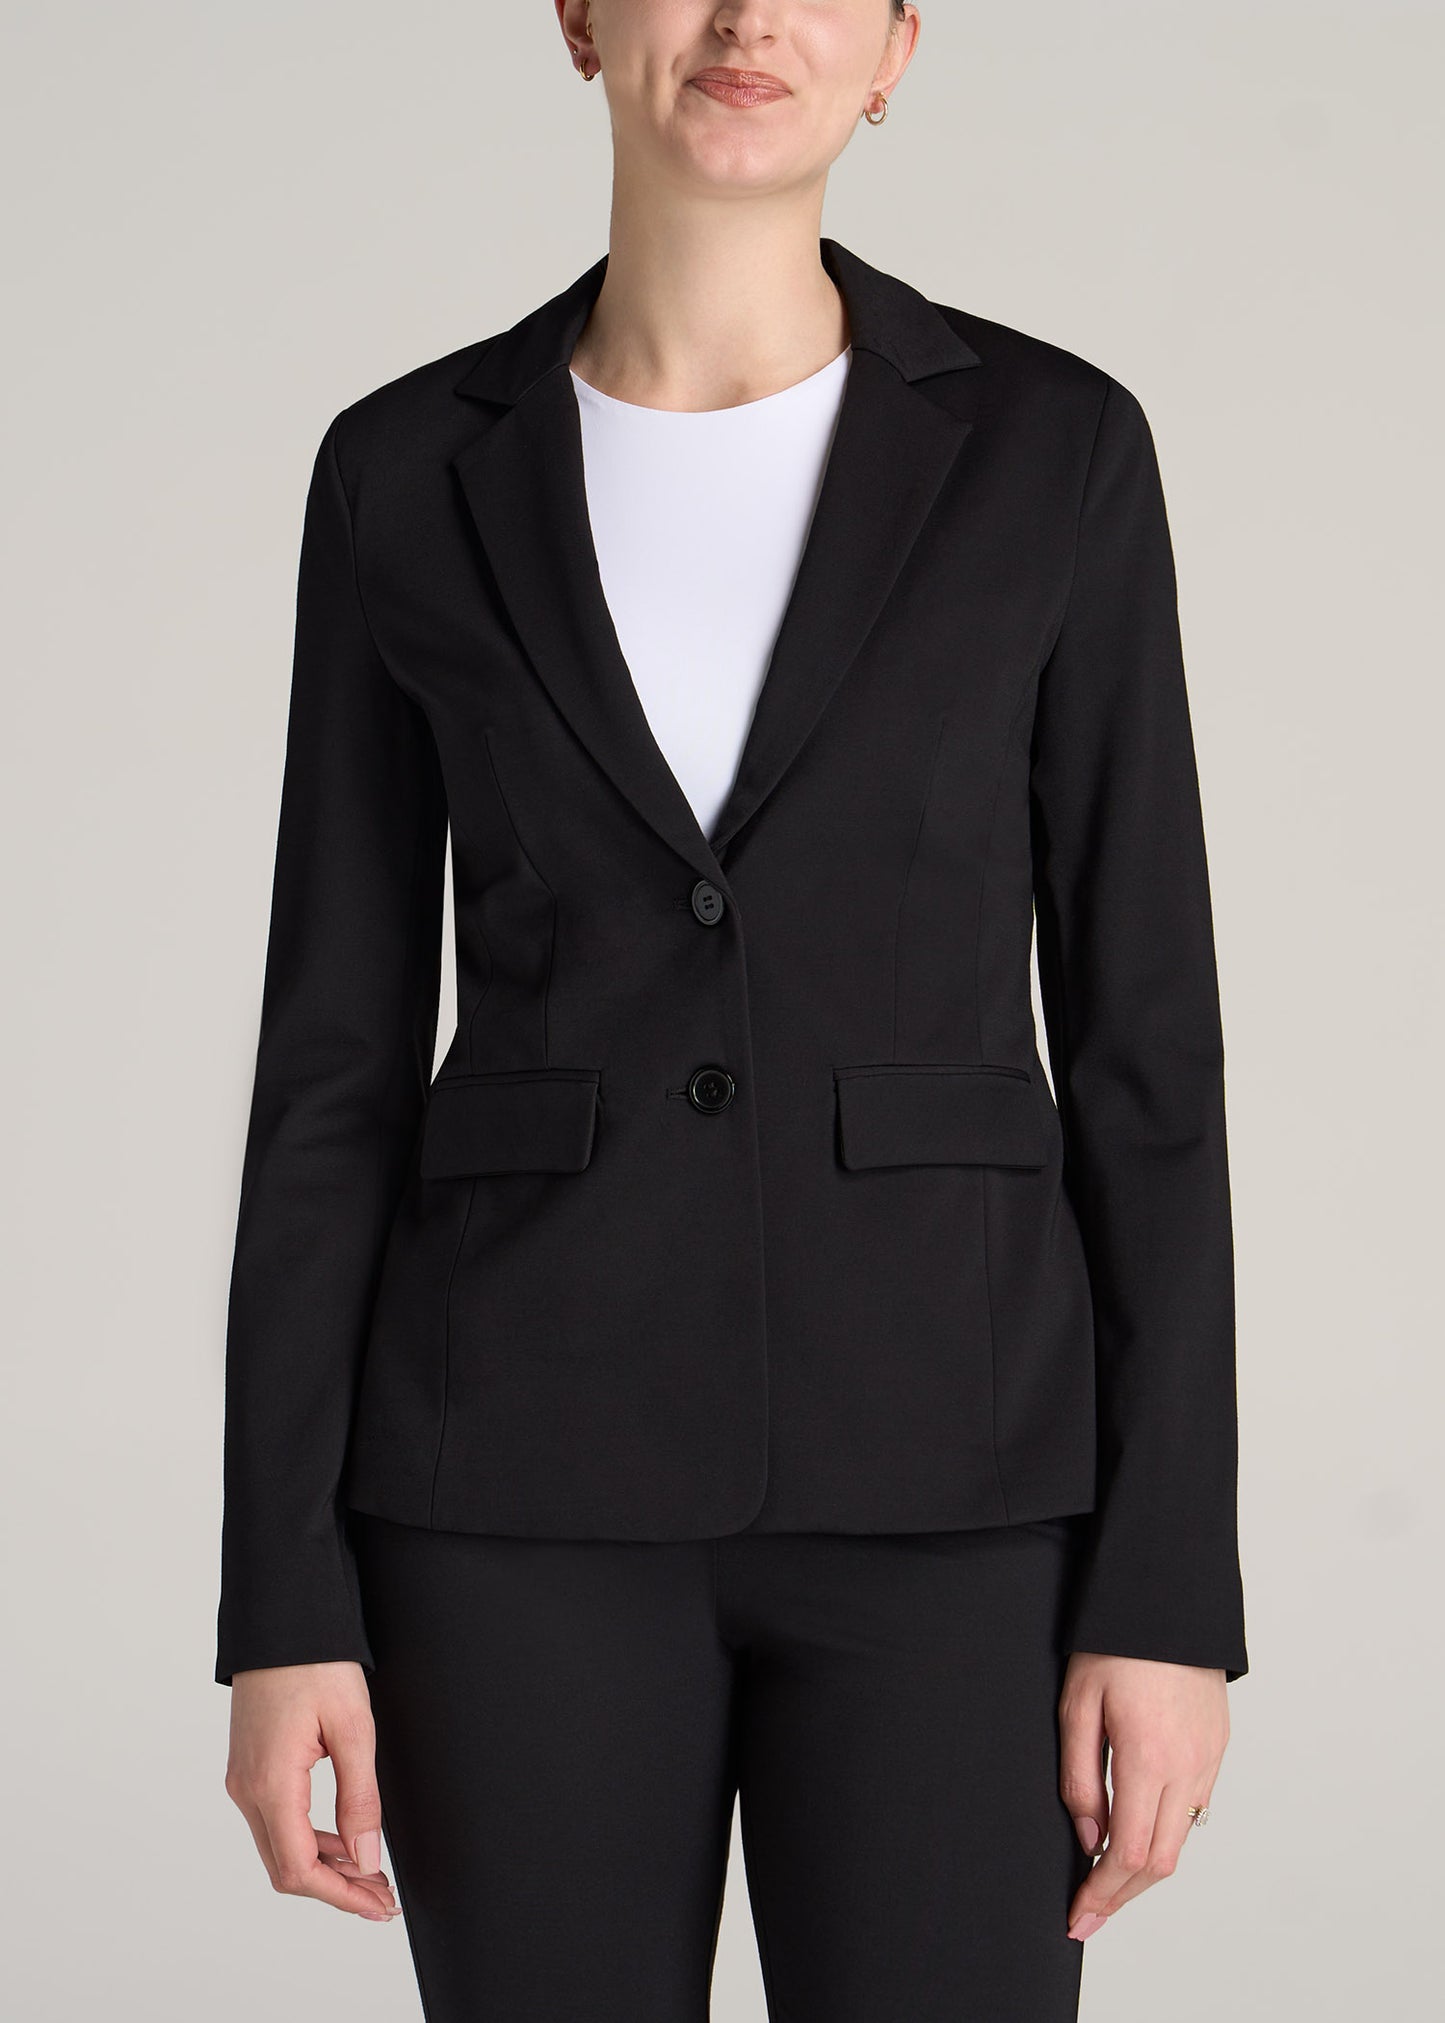 A tall woman wearing American Tall's Two-Button Blazer in the color black.